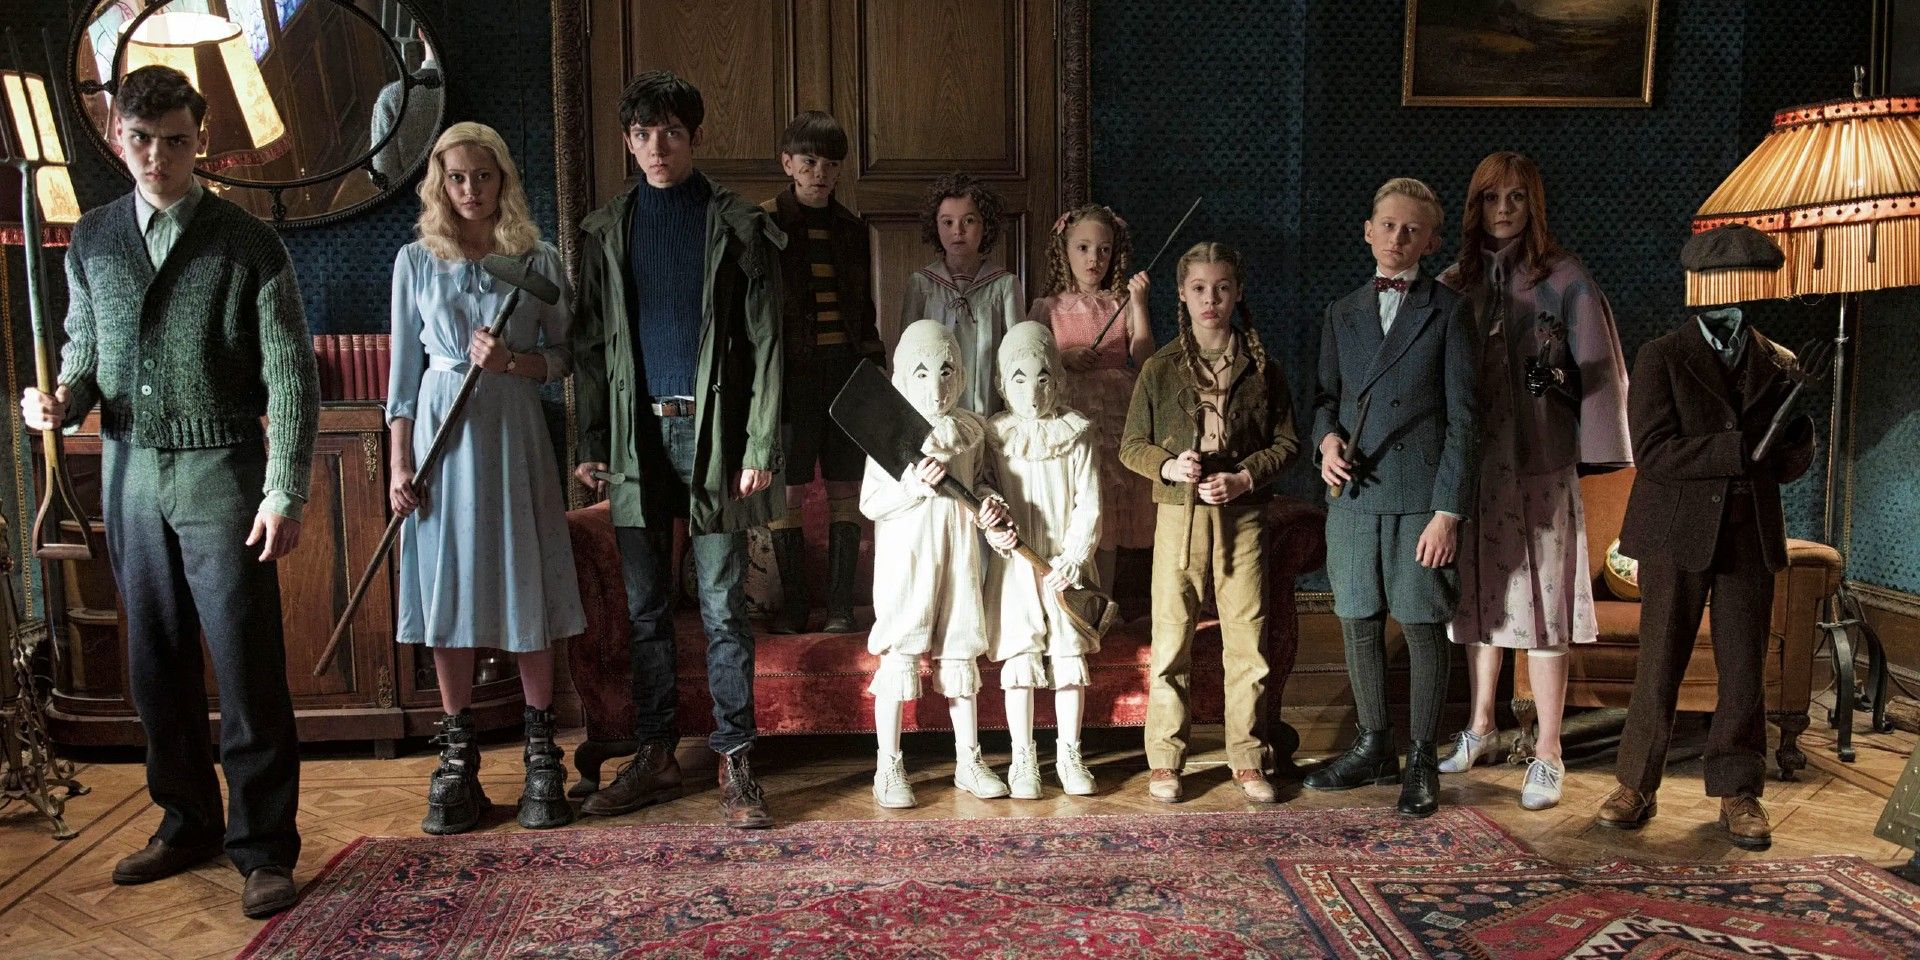 The children of Miss Peregrine's Home for Peculiar Children